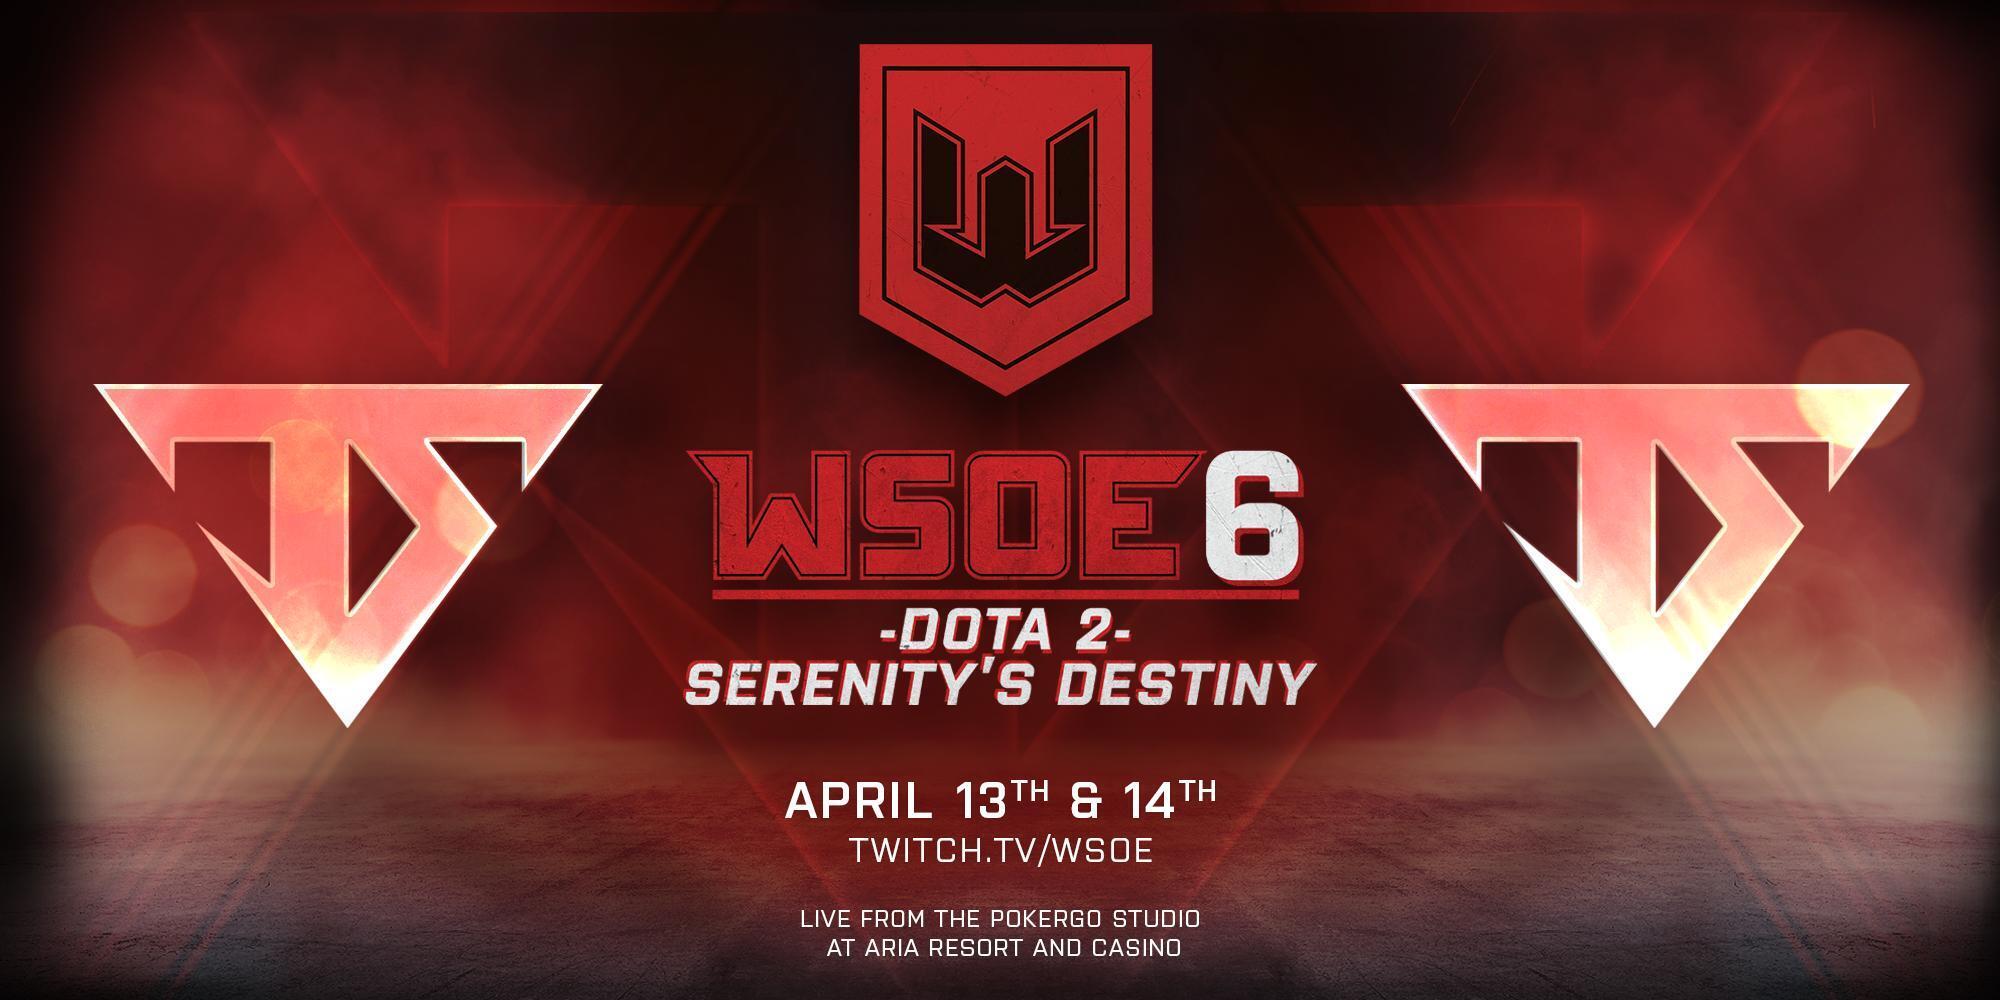 WSOE #6 is one of several tournaments filling a brief gap in the Dota 2 Pro Circuit schedule. (Image courtesy of @WSOE / Twitter)